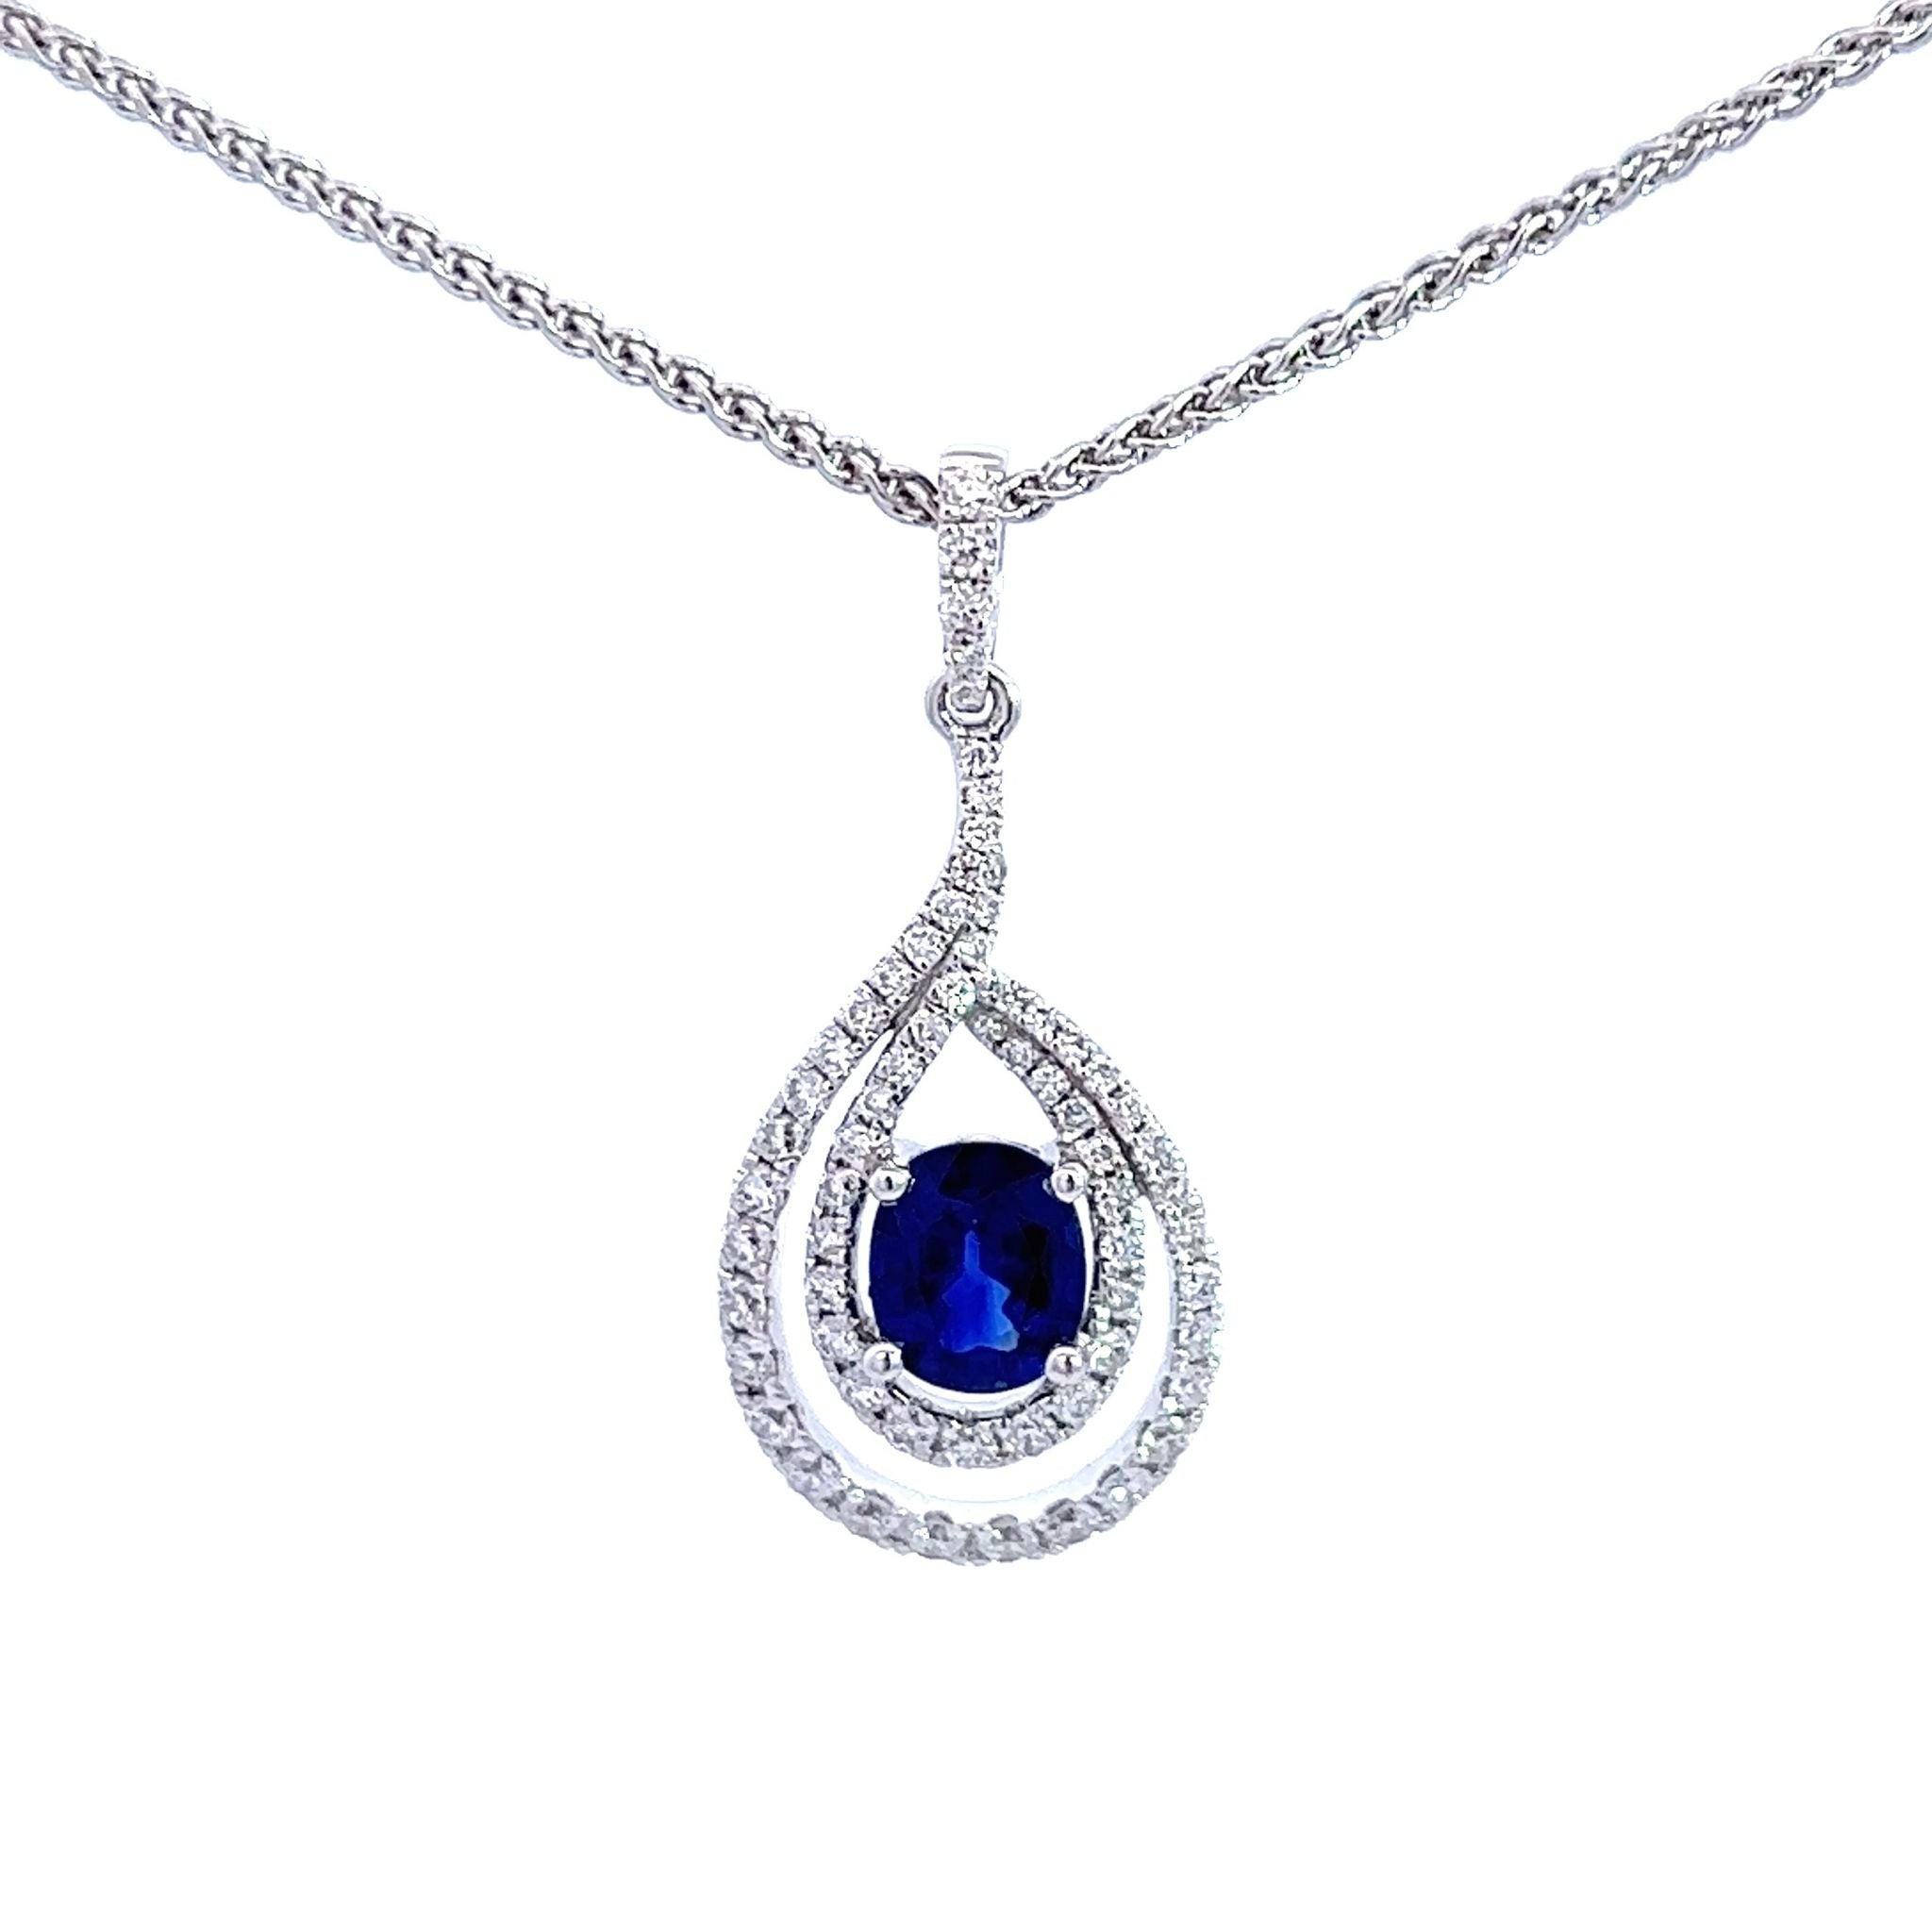 18ct White Gold .73ct Diamond Necklace - Walker & Hall